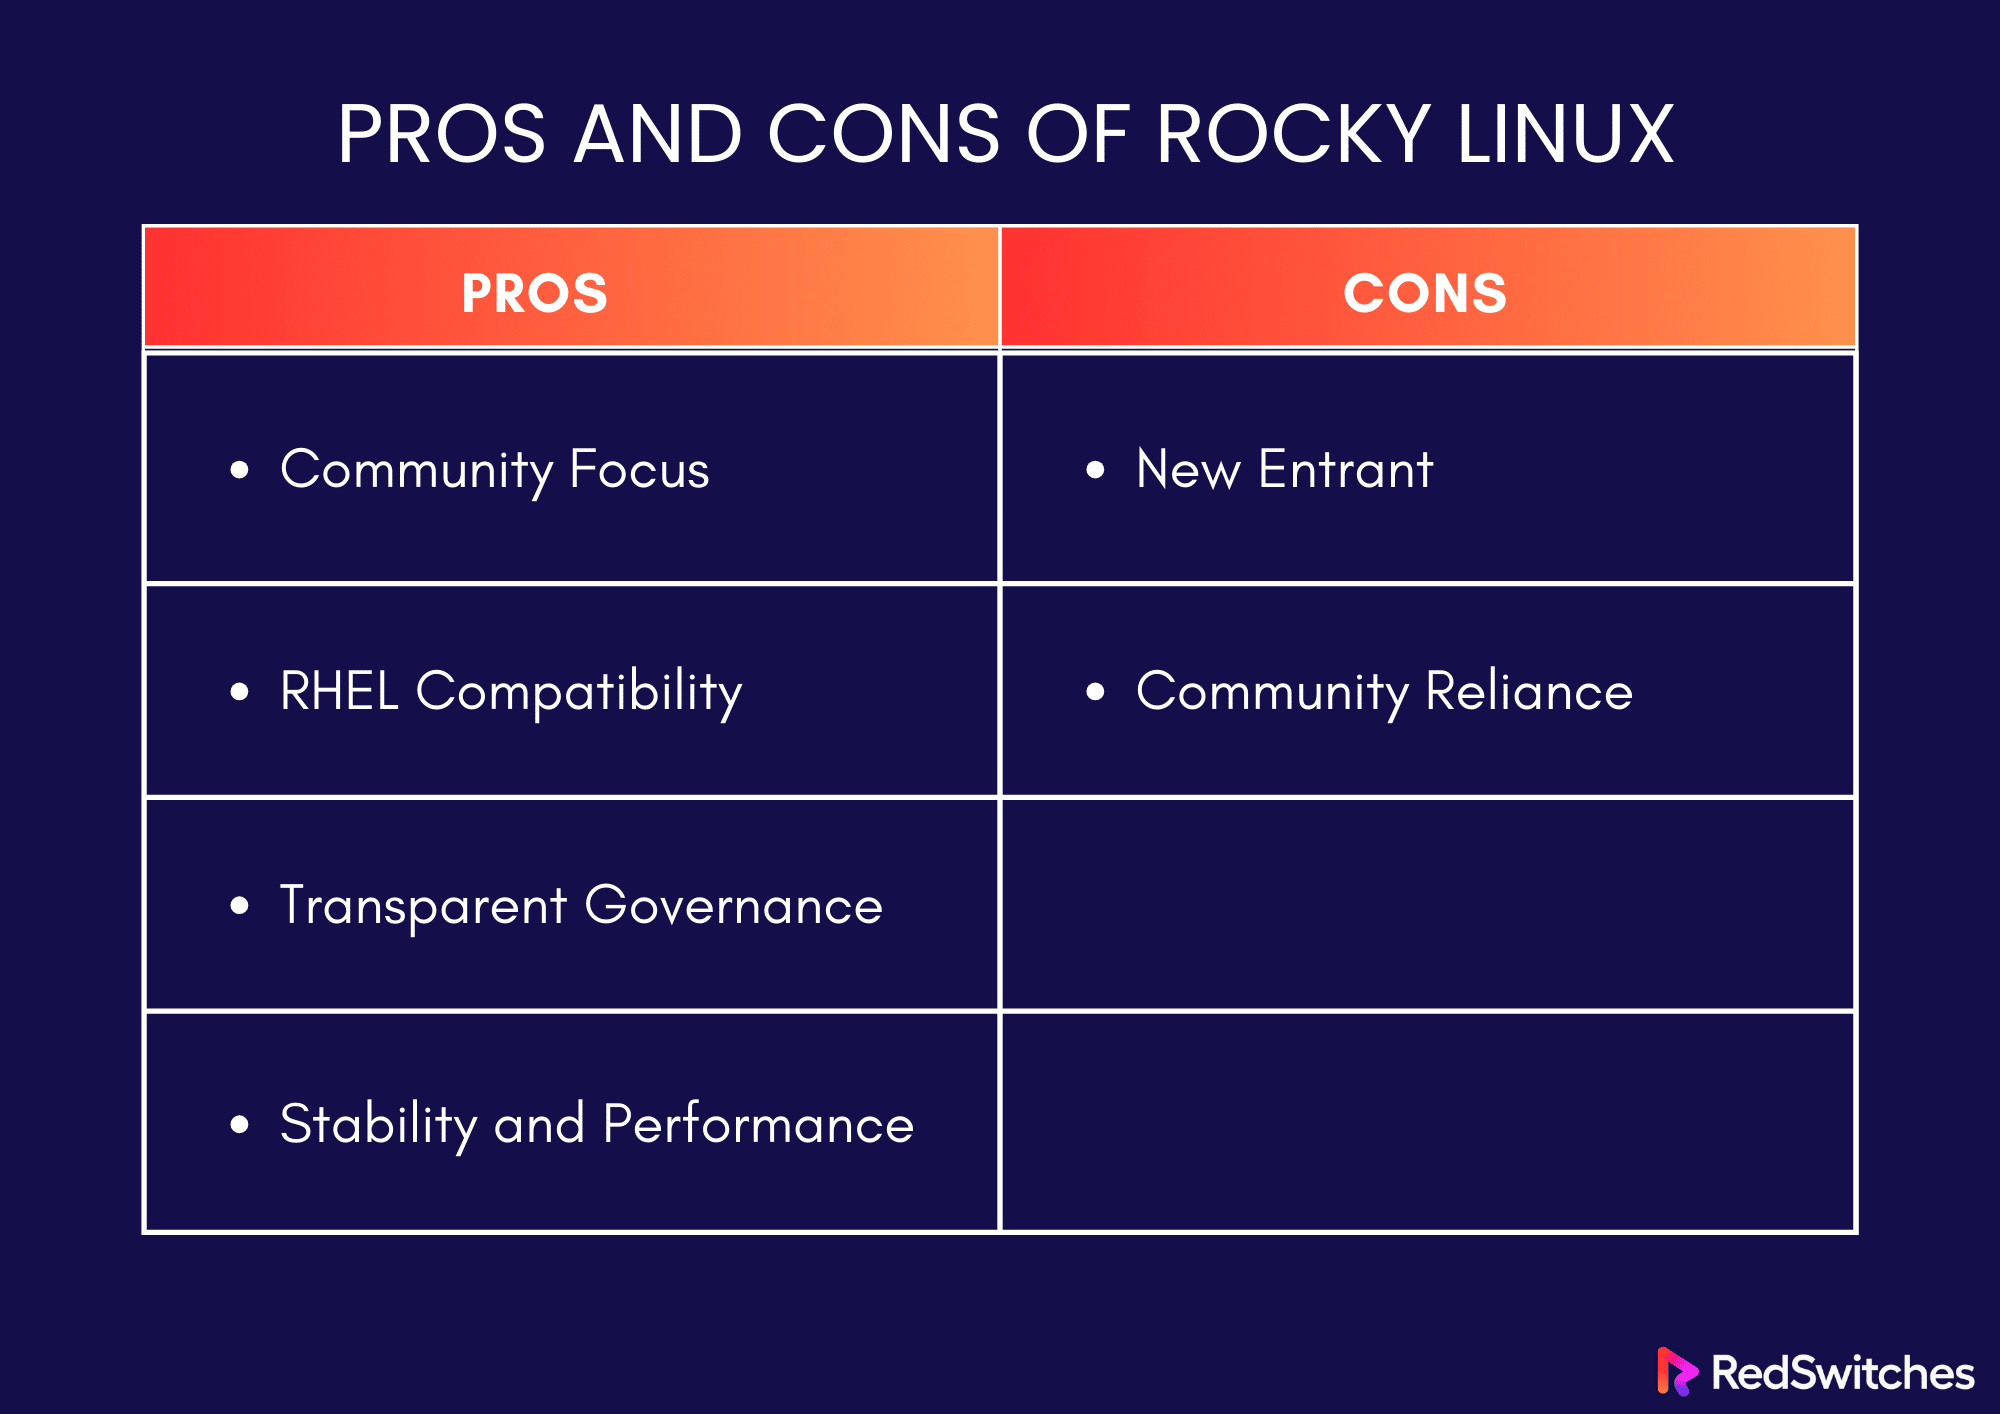 Pros and Cons of Rocky Linux